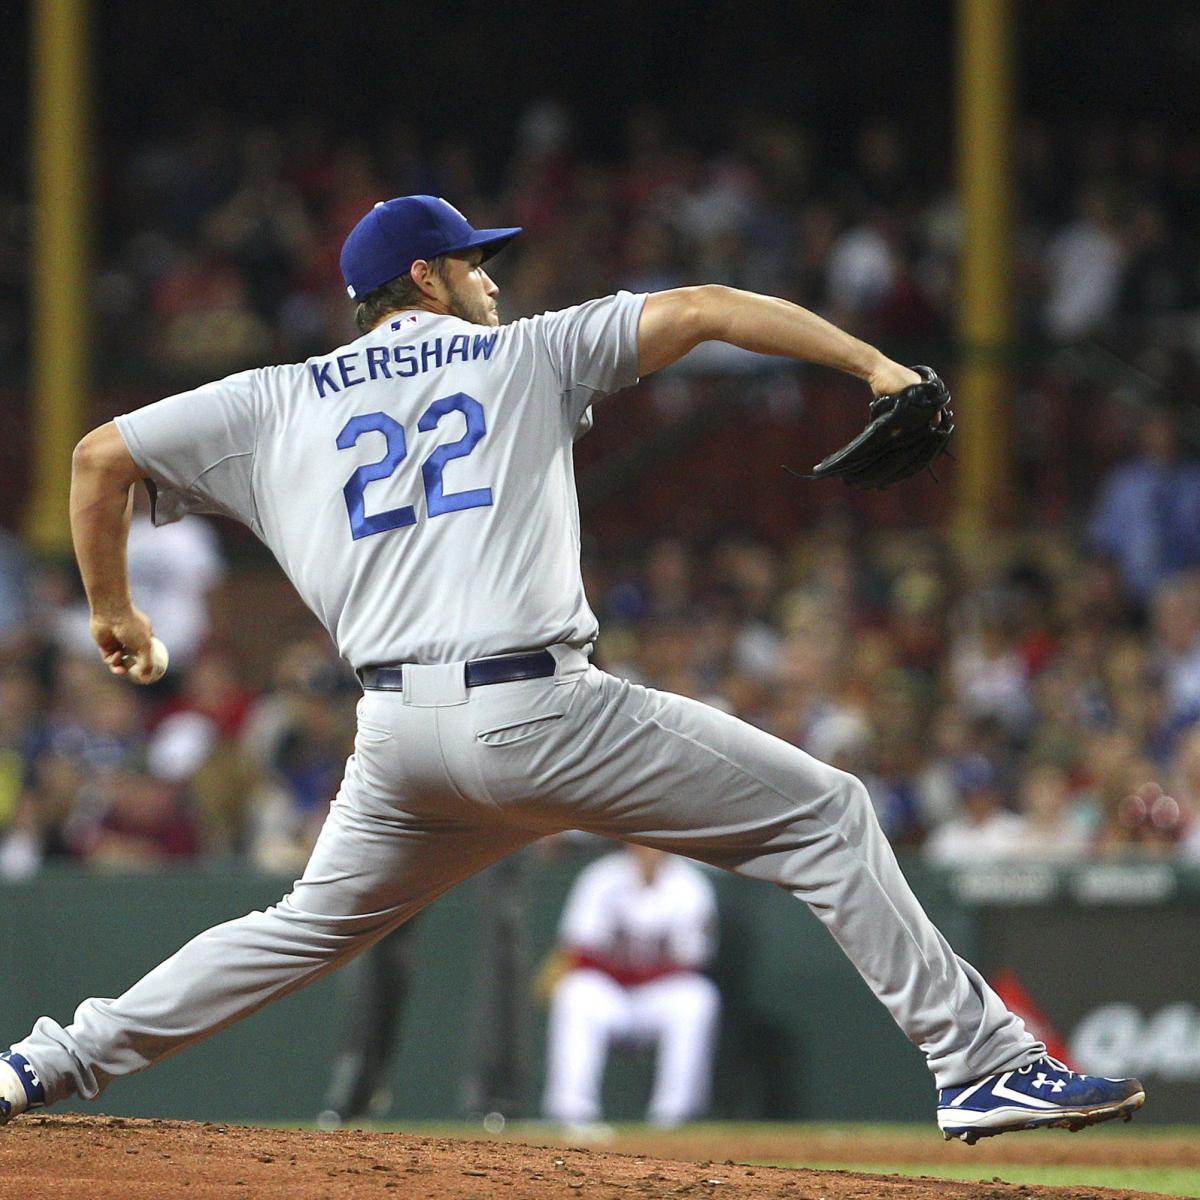 Clayton Kershaw Leads Dodgers to 1st 4Game Opening Day Win Streak